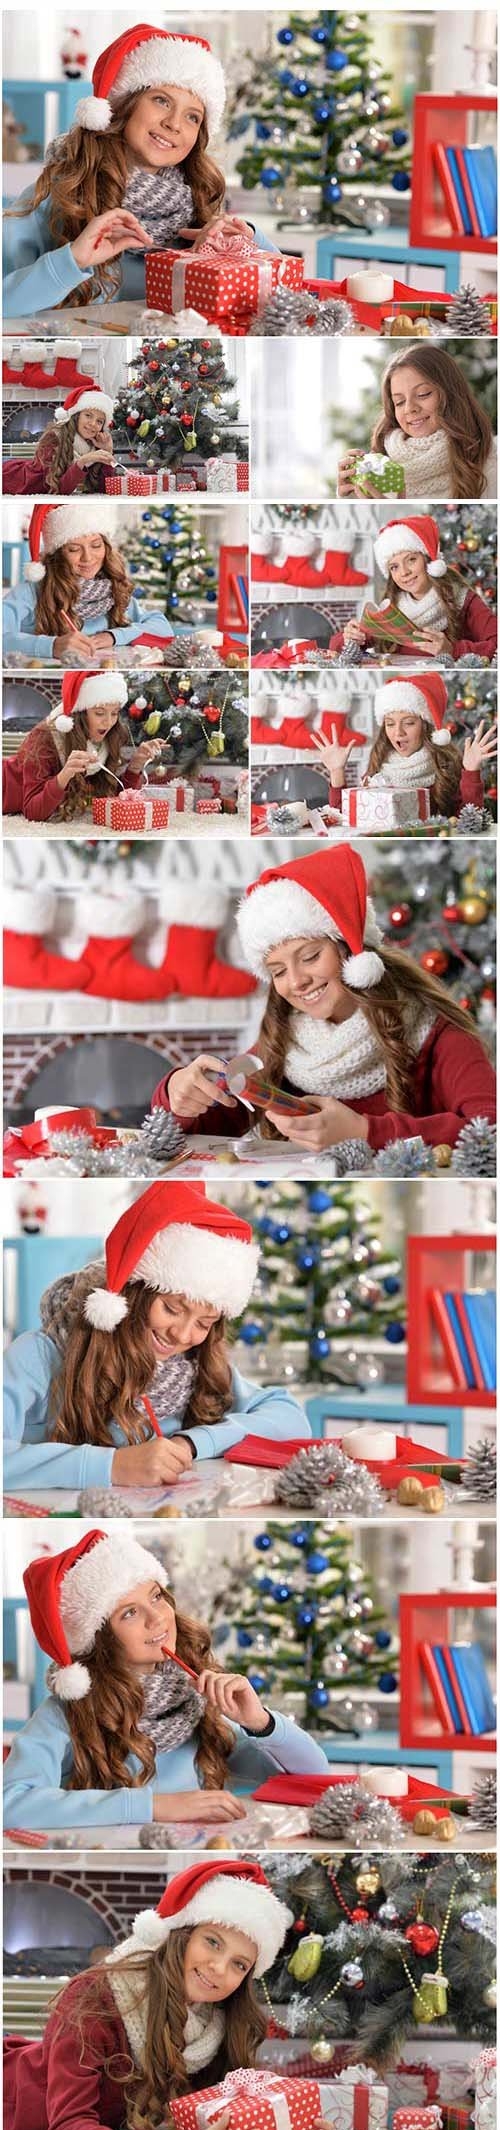 New Year and Christmas stock photos 85